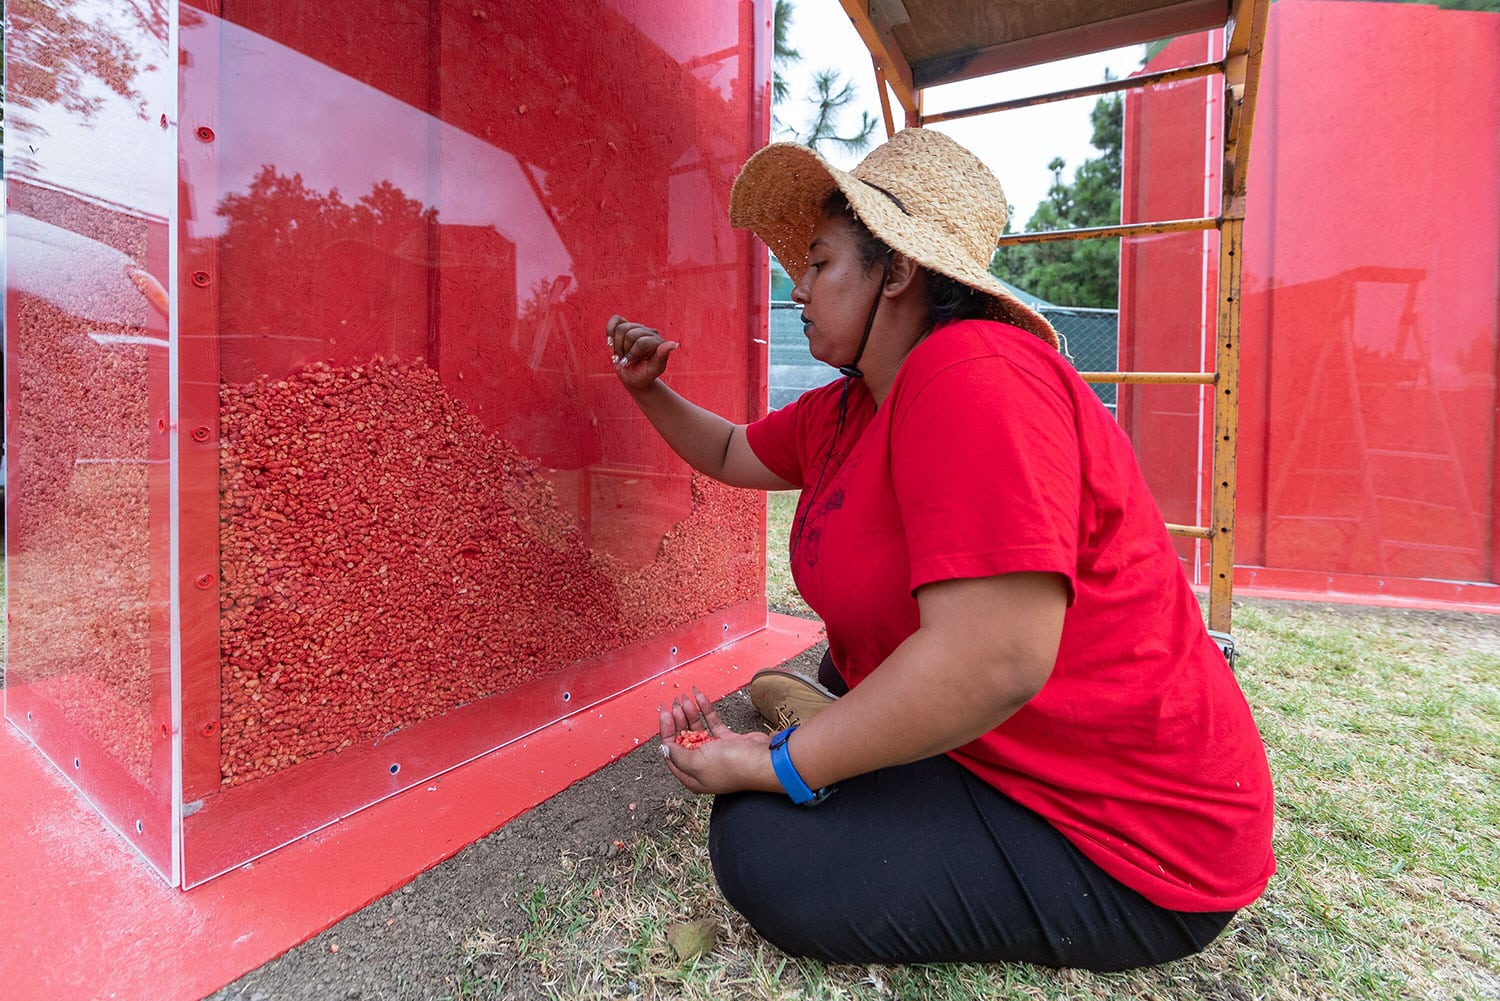 Jazmín Urrea sat kneeling as she works on her glass structure installation partially filled with Hot Cheetos